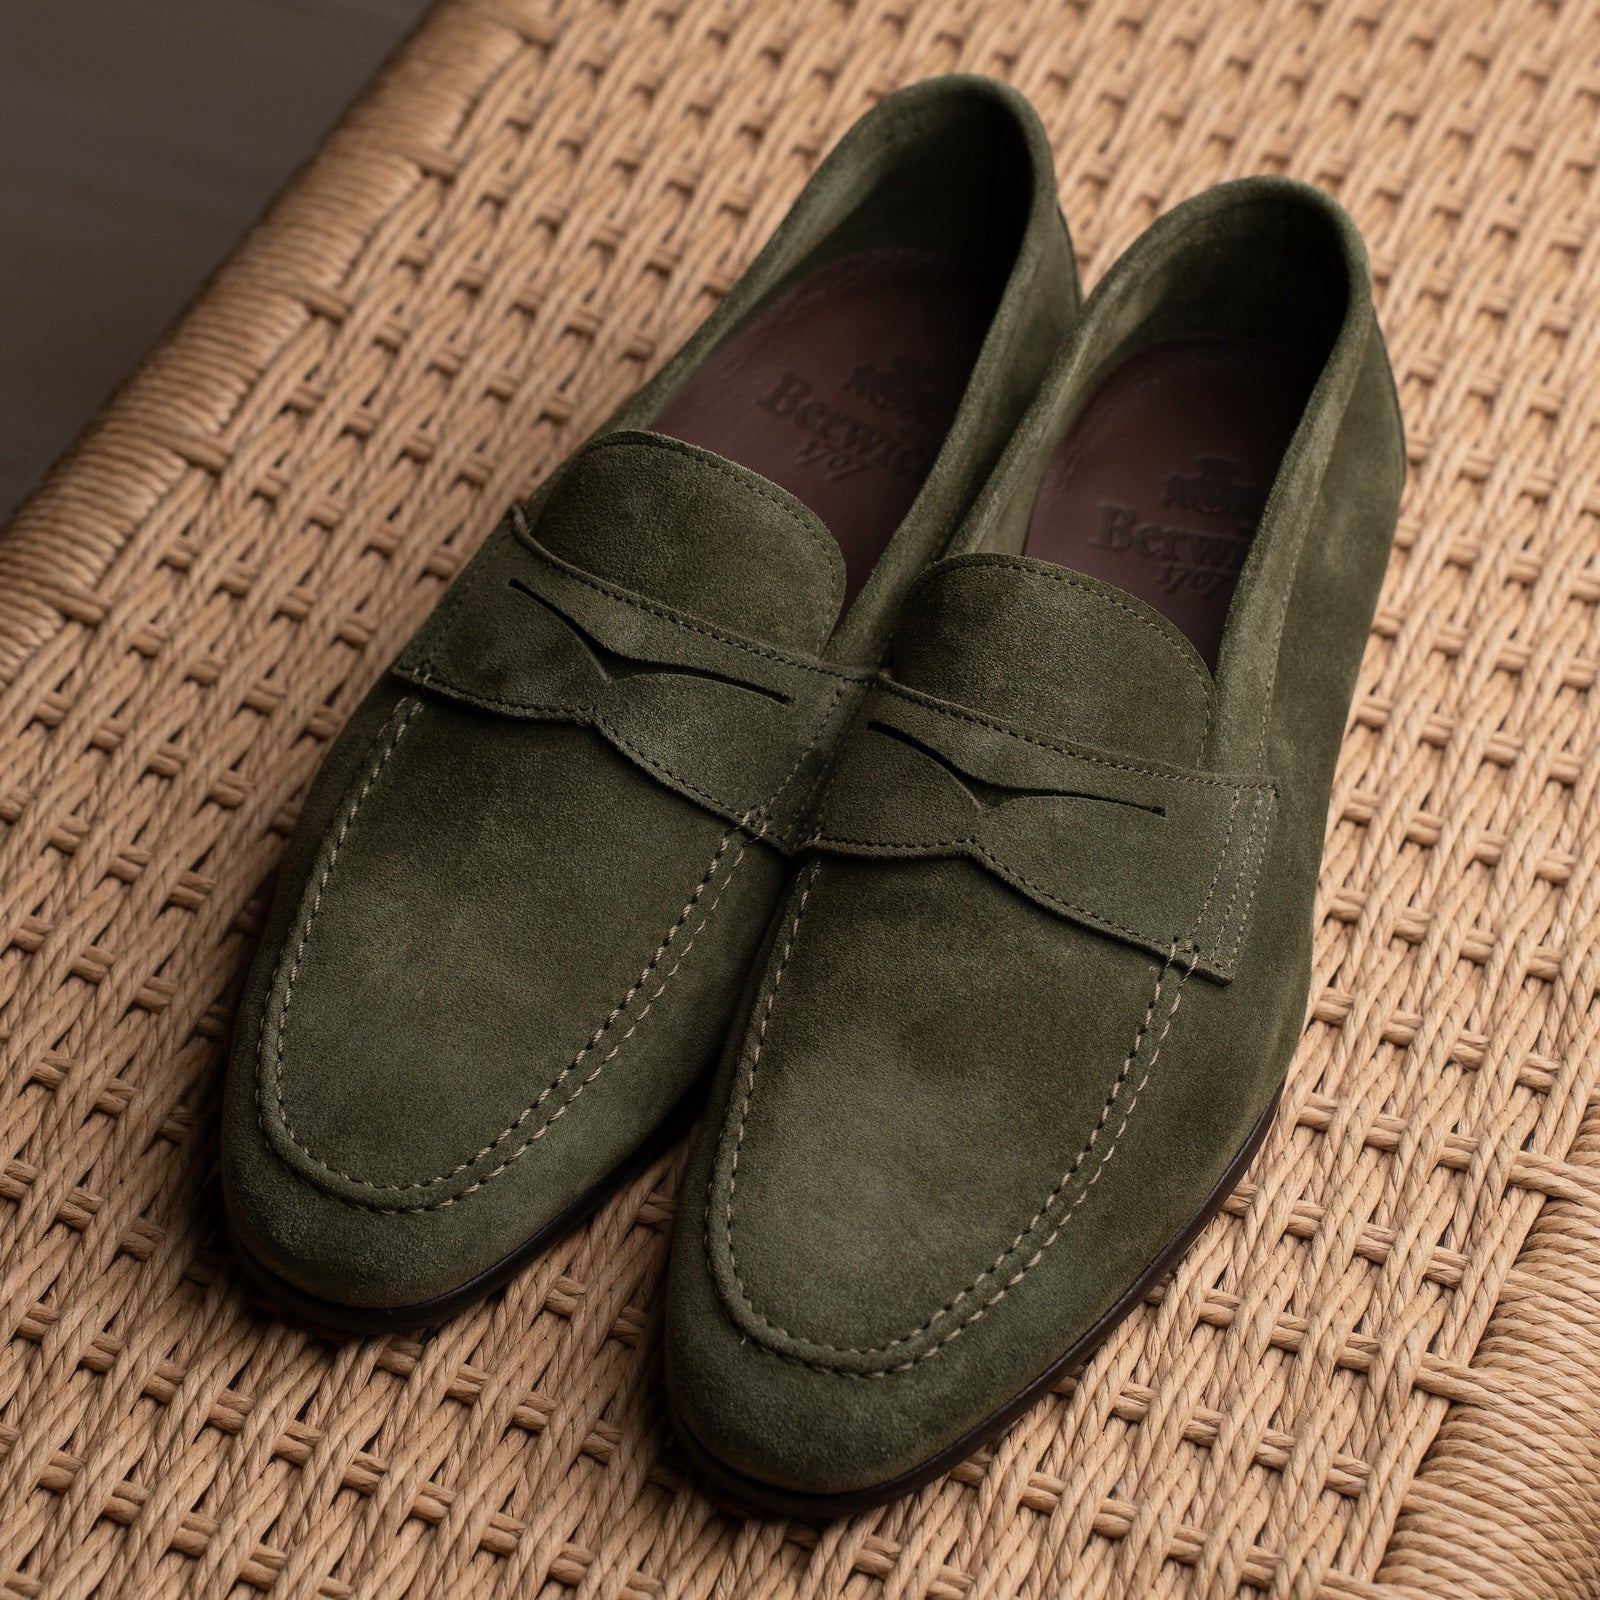 Unlined Penny Loafer - Green Suede